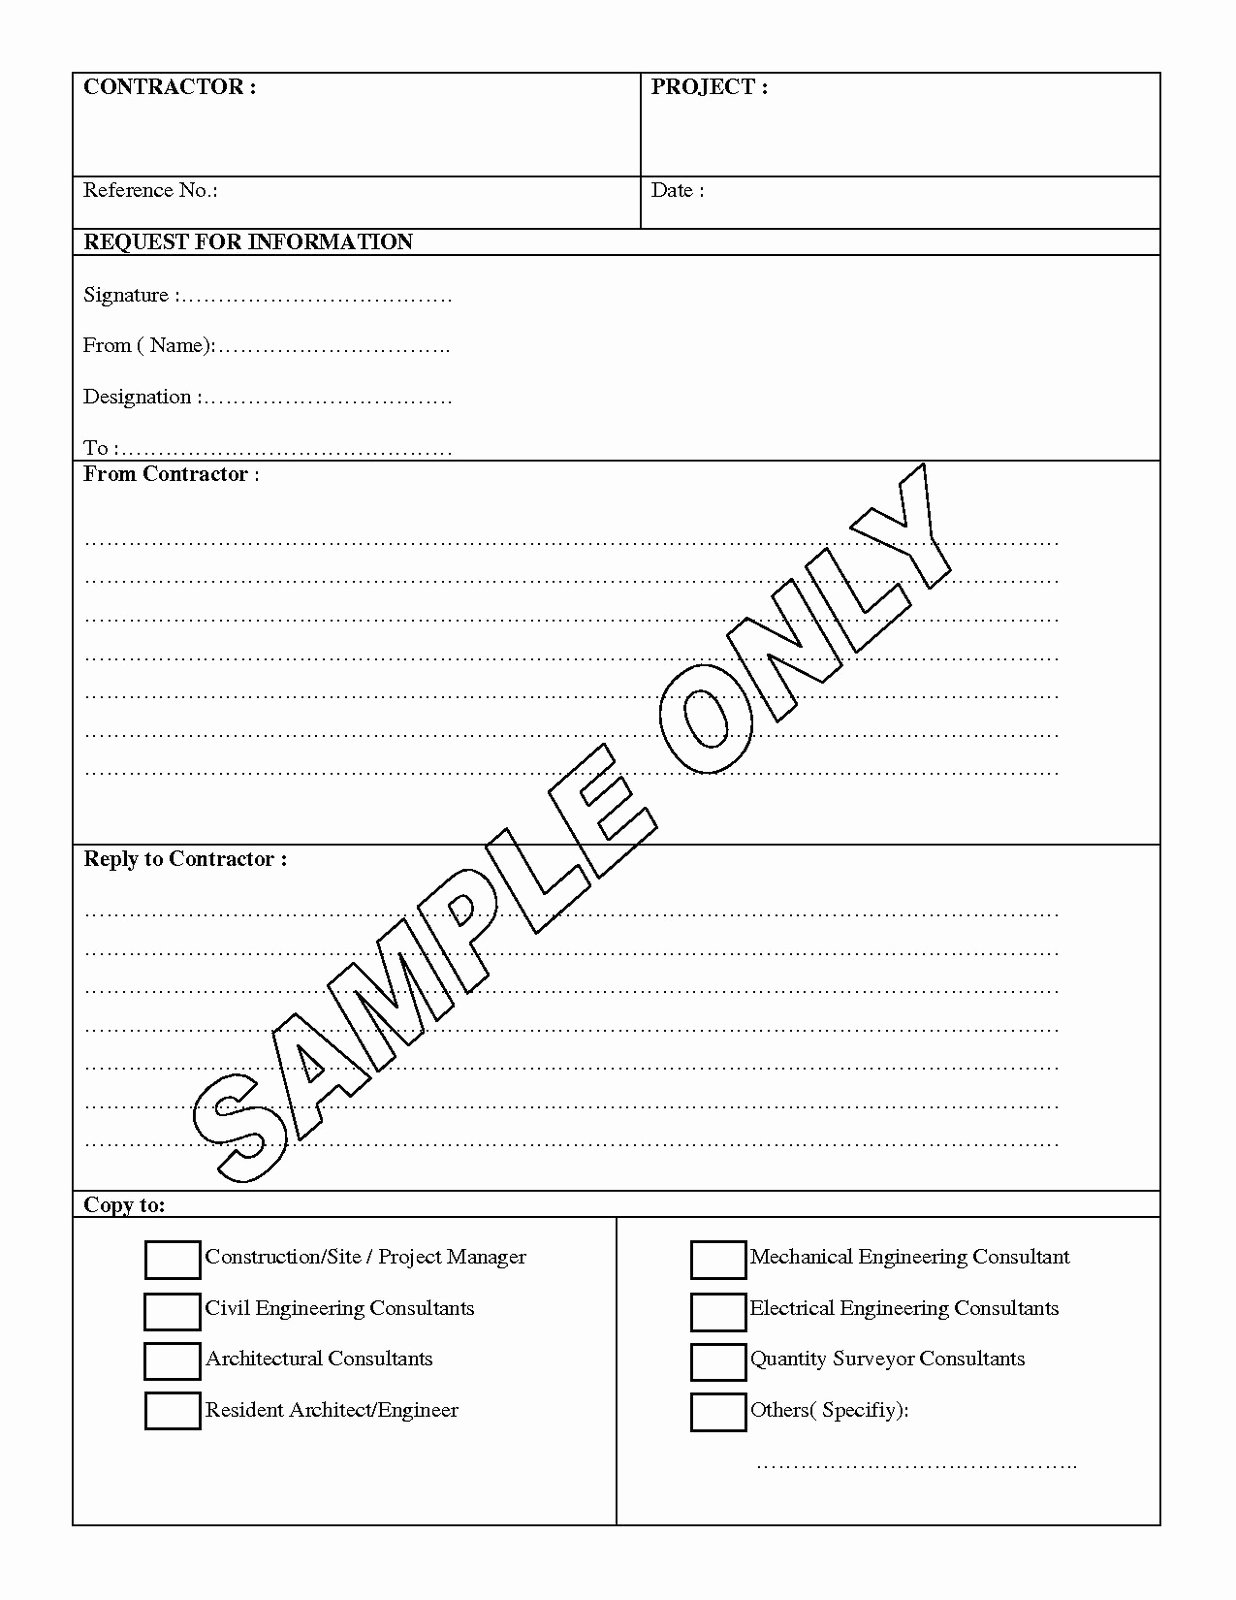 Information form Template Lovely Request for Information Template